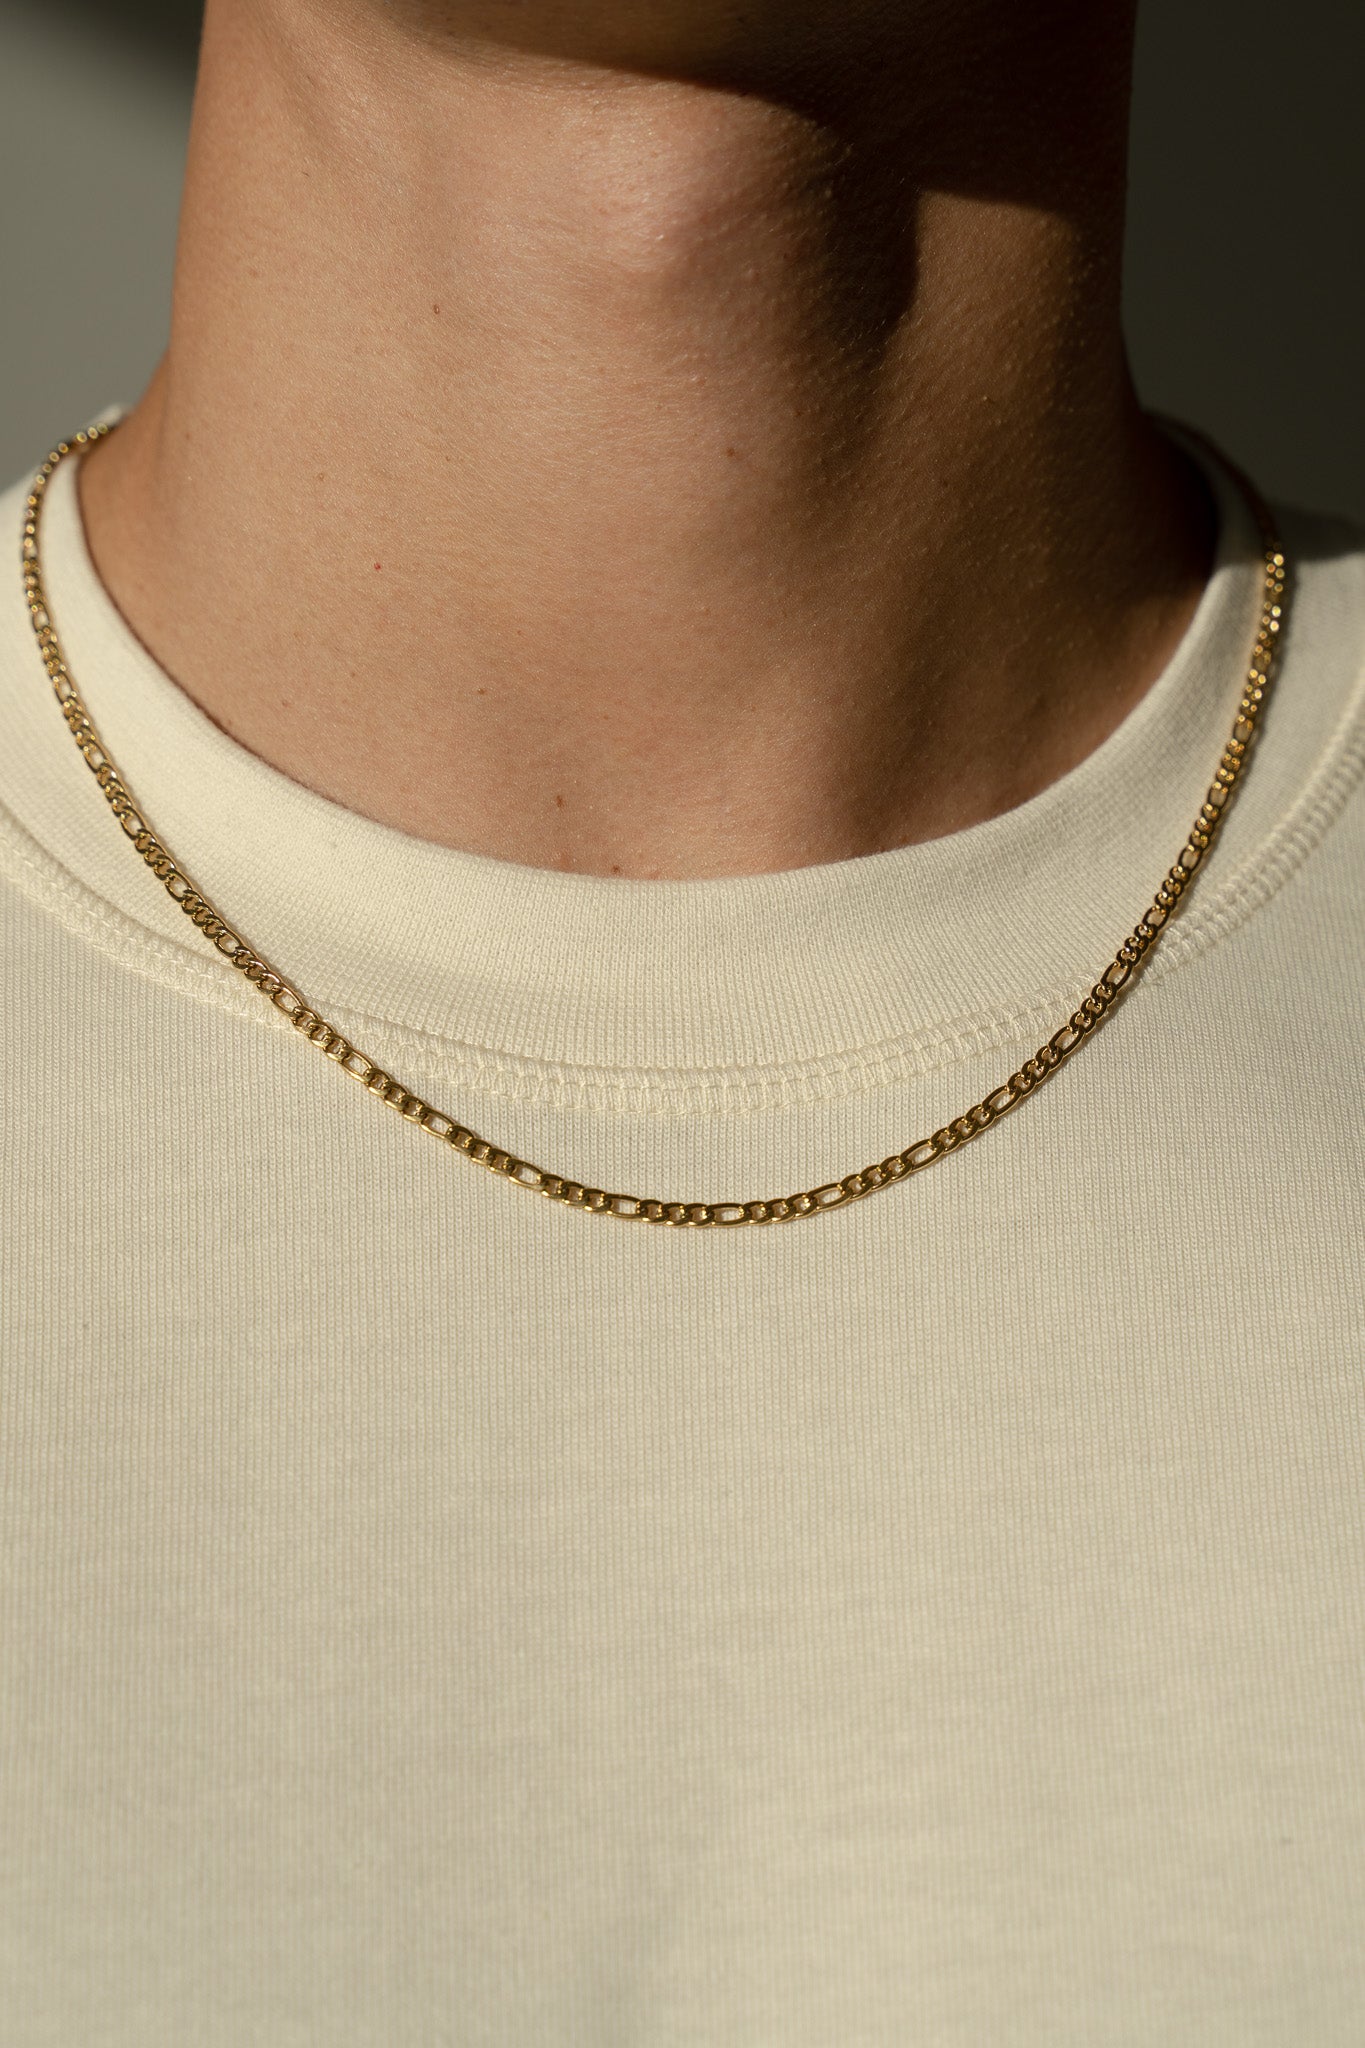 Alexander Necklace in Gold - 3mm